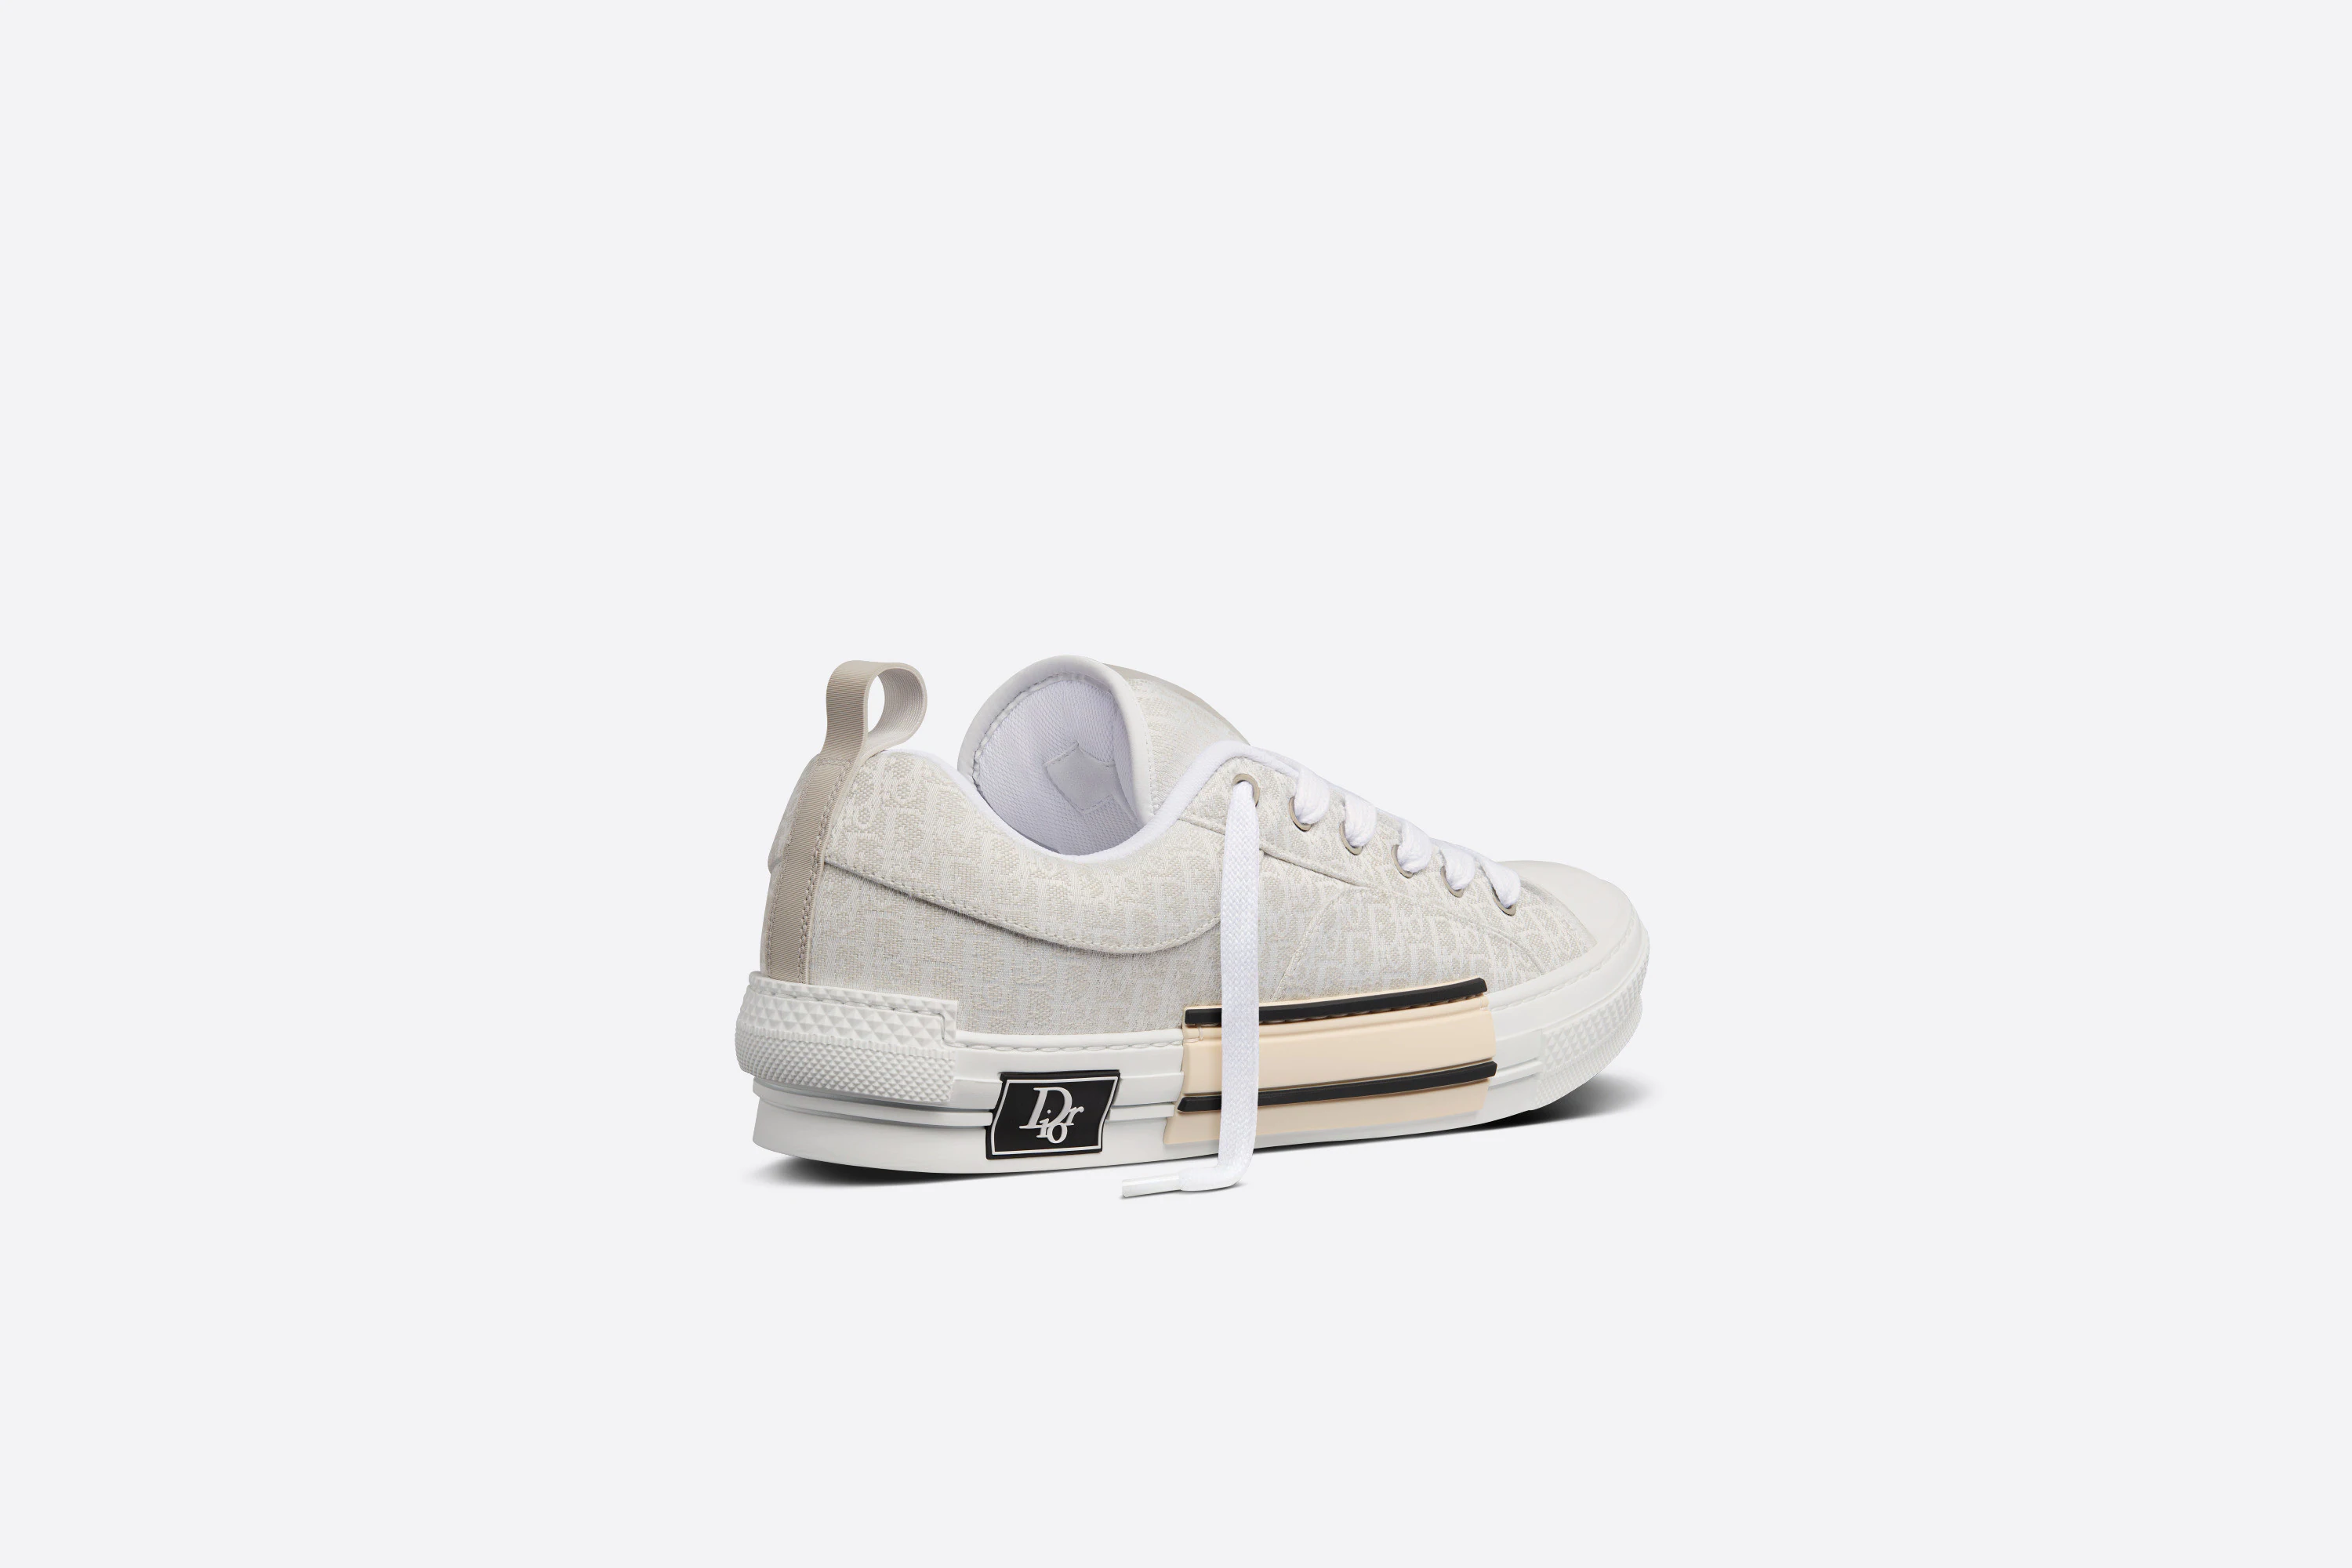 CHRISTIAN DIOR B23 LOWTOP CANVAS WITH DIOR AND SHAWN MOTIF SNEAKER